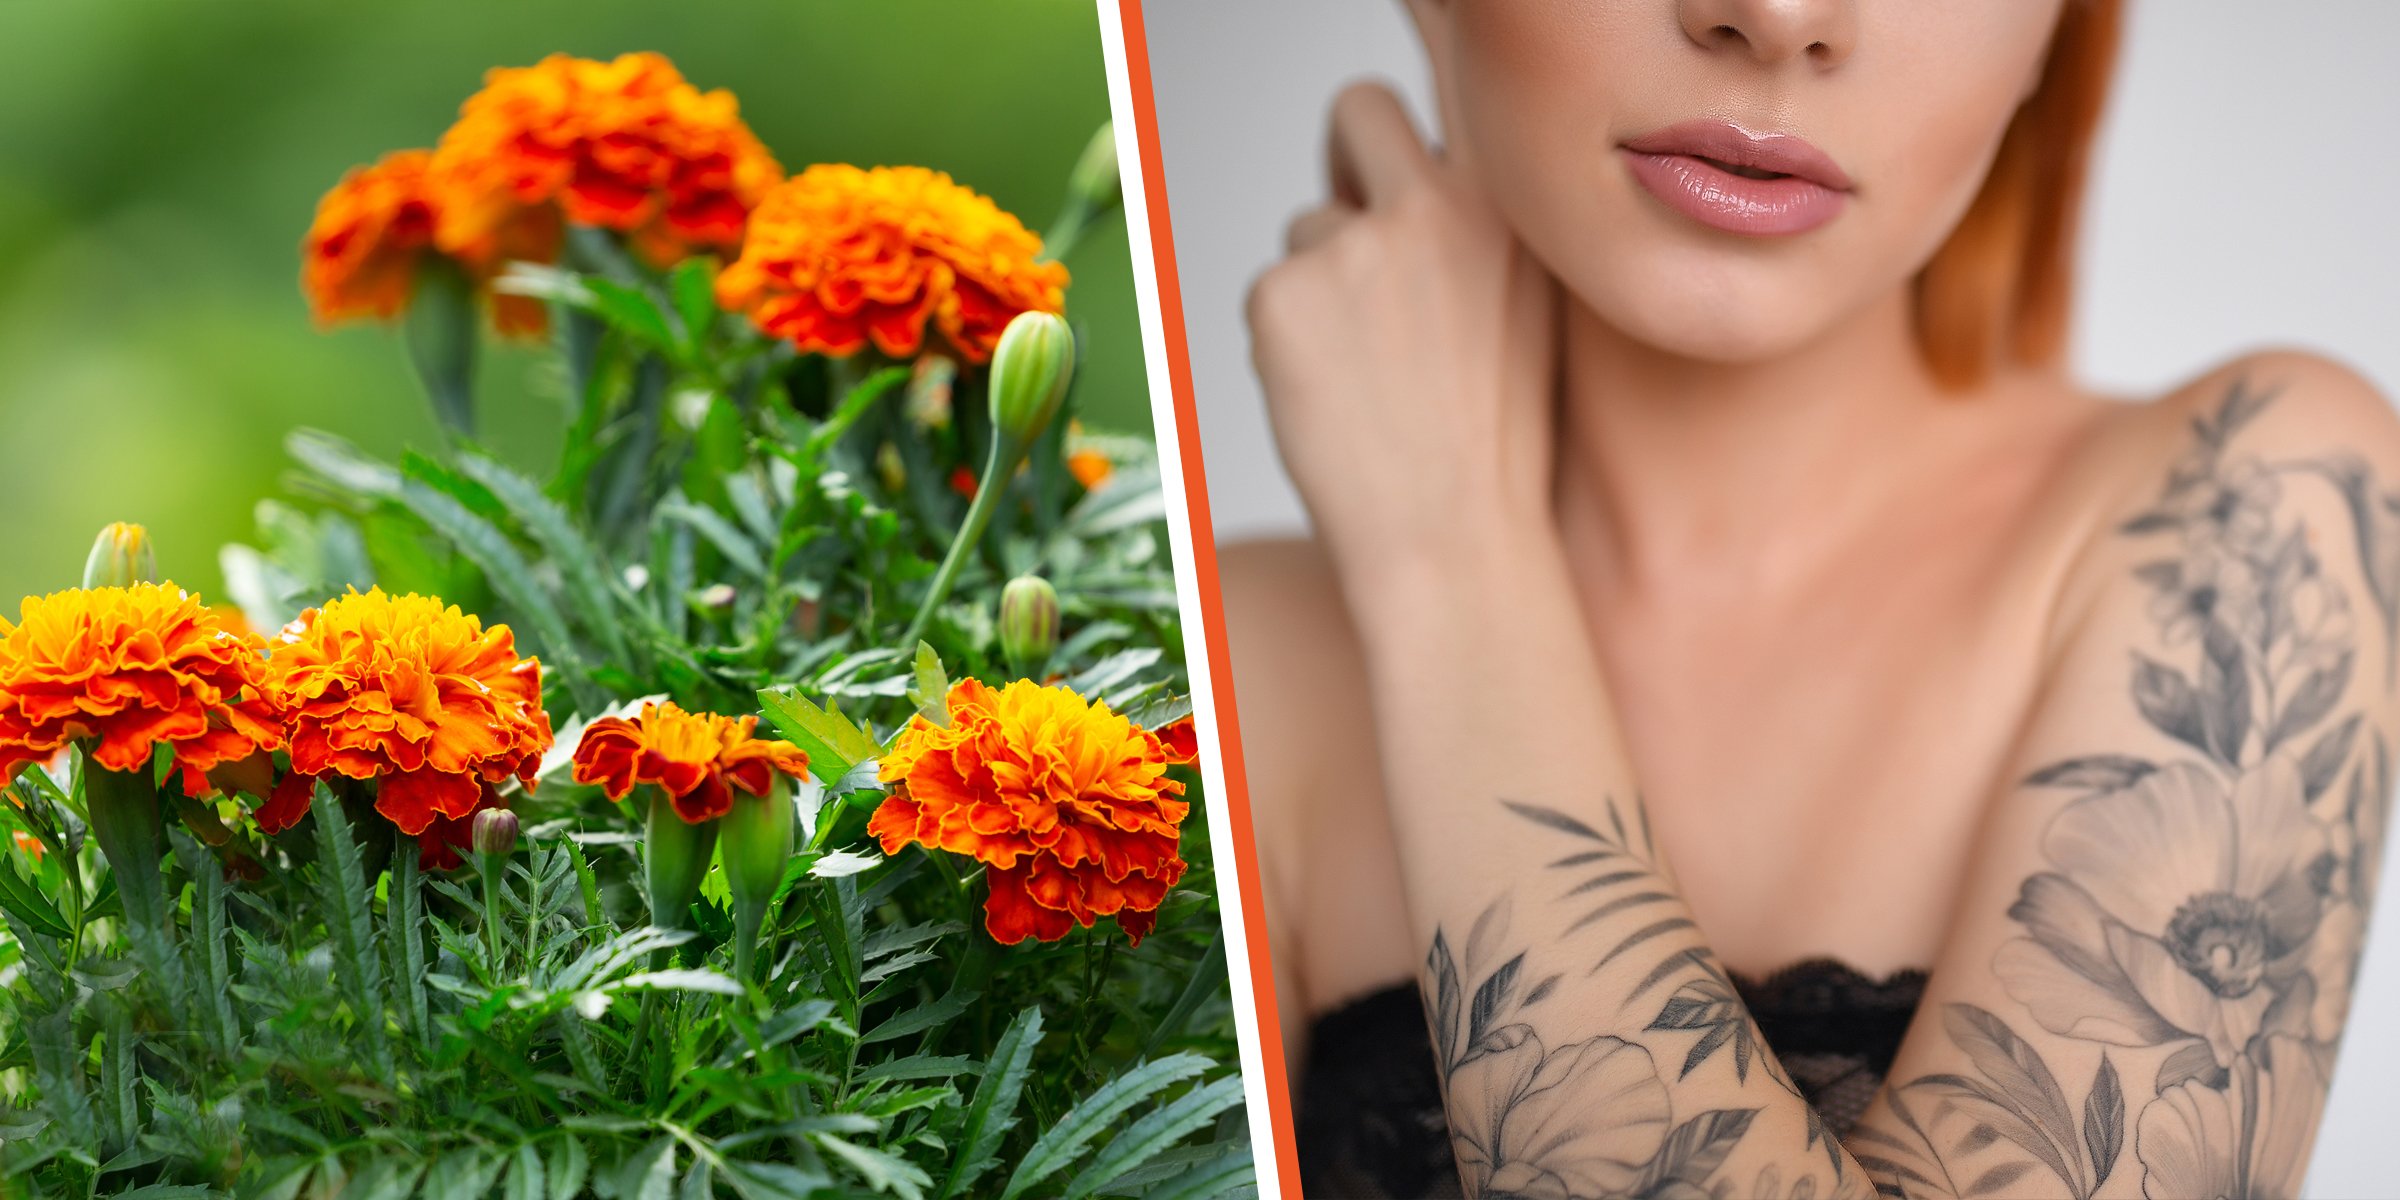 Marigolds and woman with marigold flower tattoos. | Source: Shutterstock